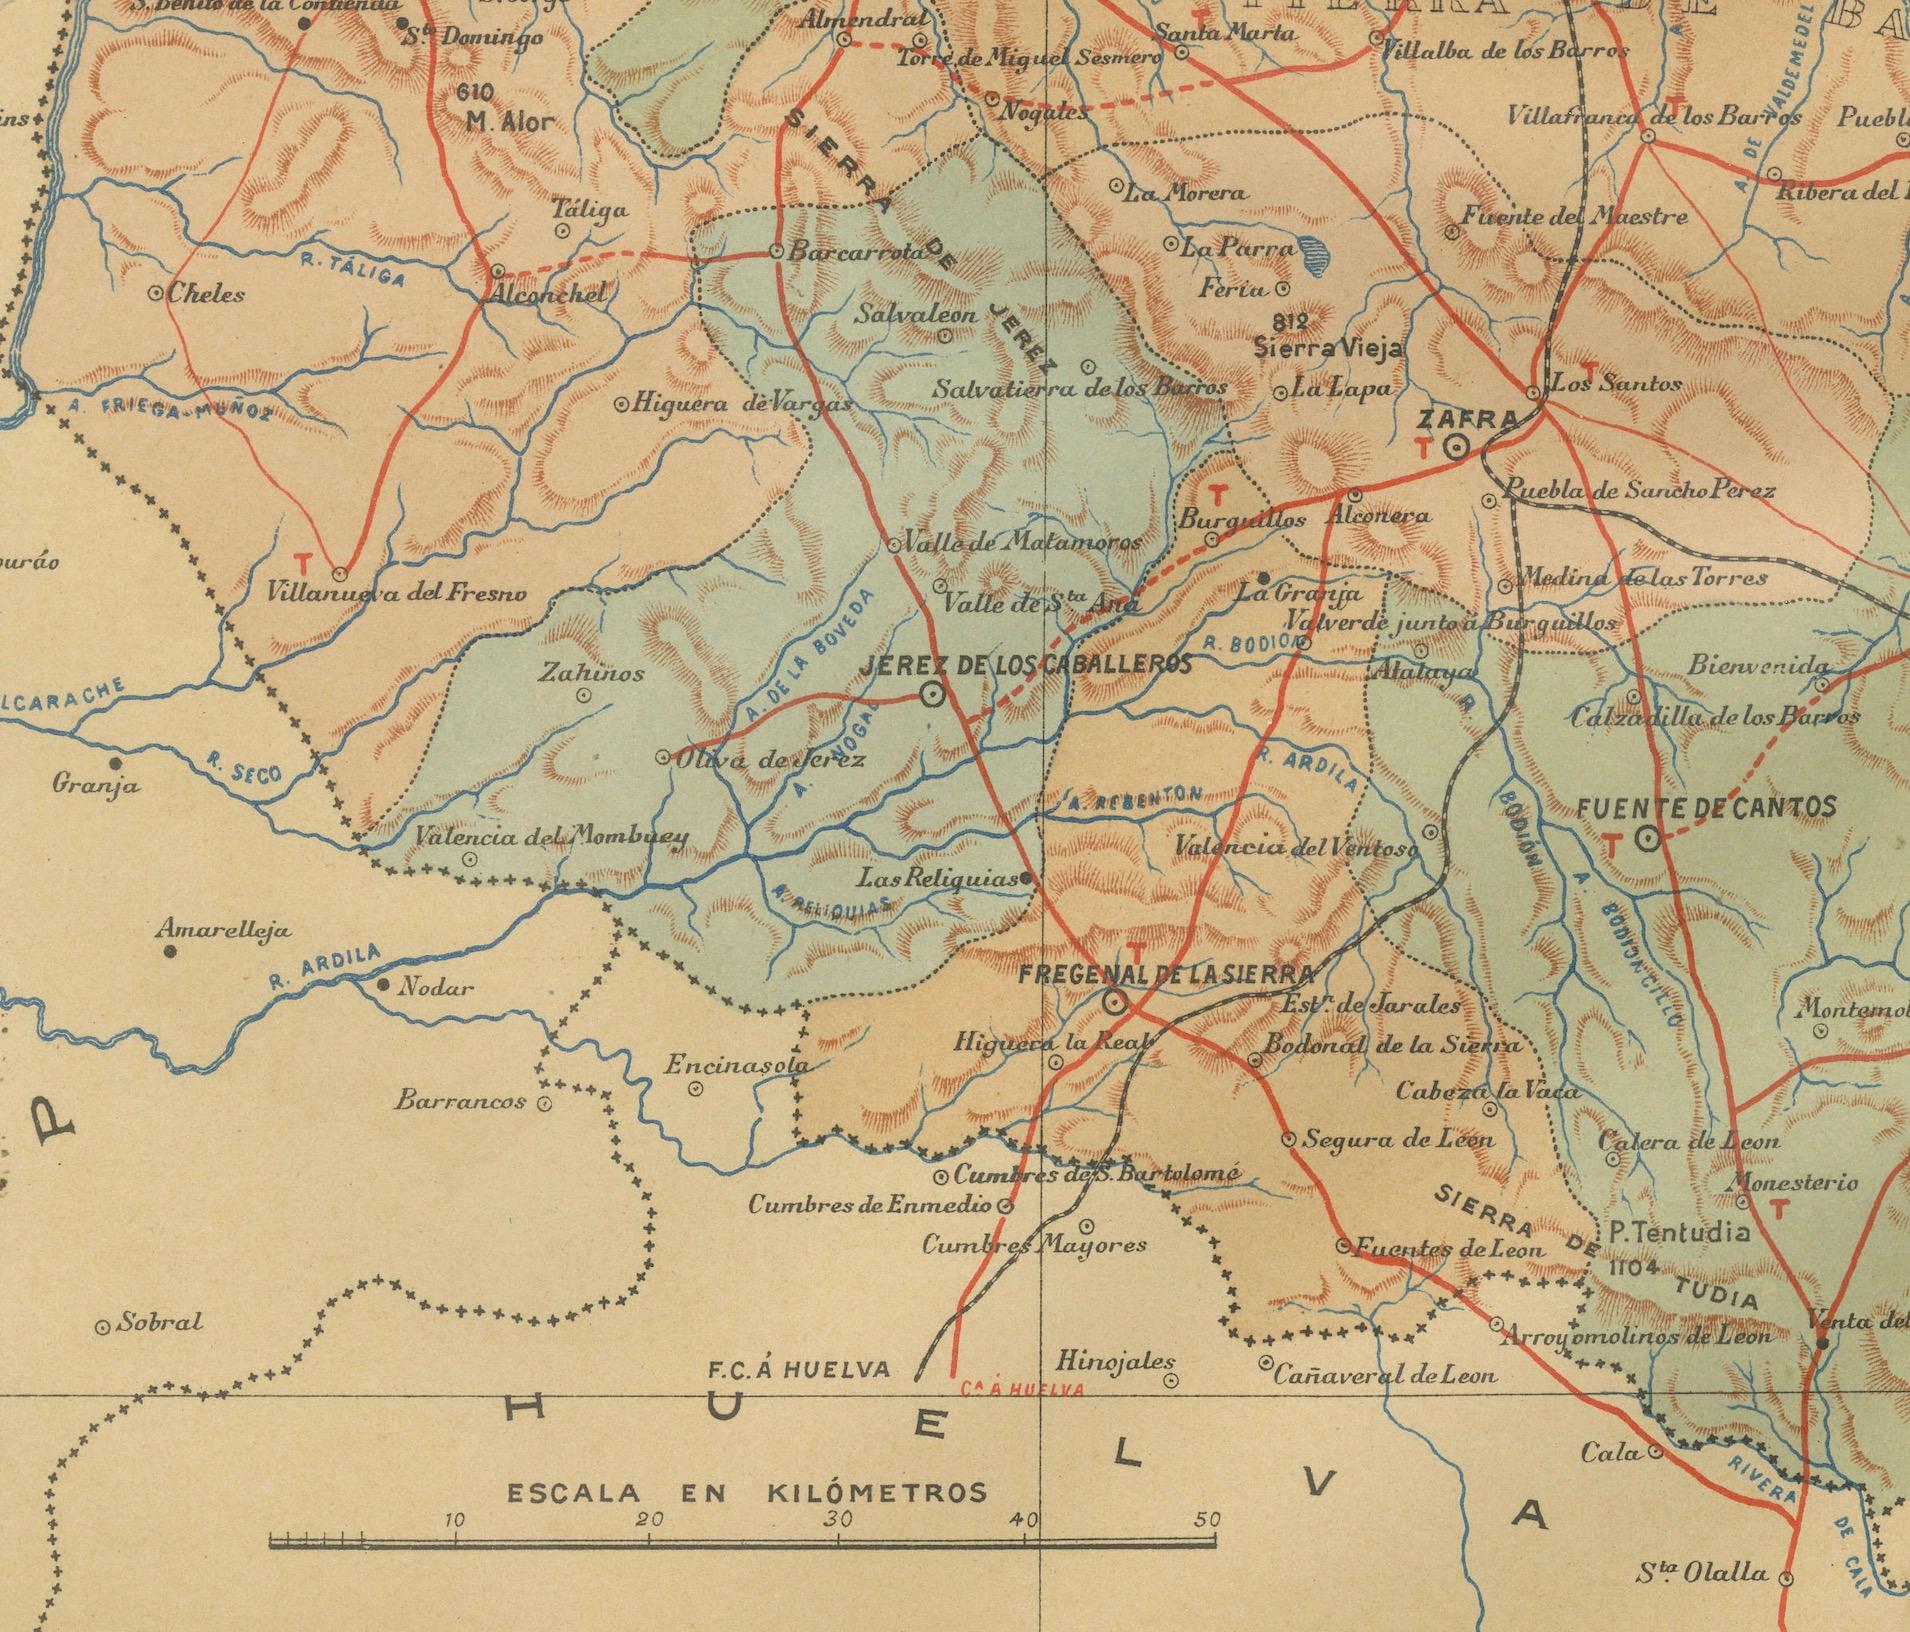 This original antique map for sale is of the province of Badajoz, part of the autonomous community of Extremadura in Spain, dated 1901. It illustrates several important features:

The map shows the varied landscape, with contour lines indicating